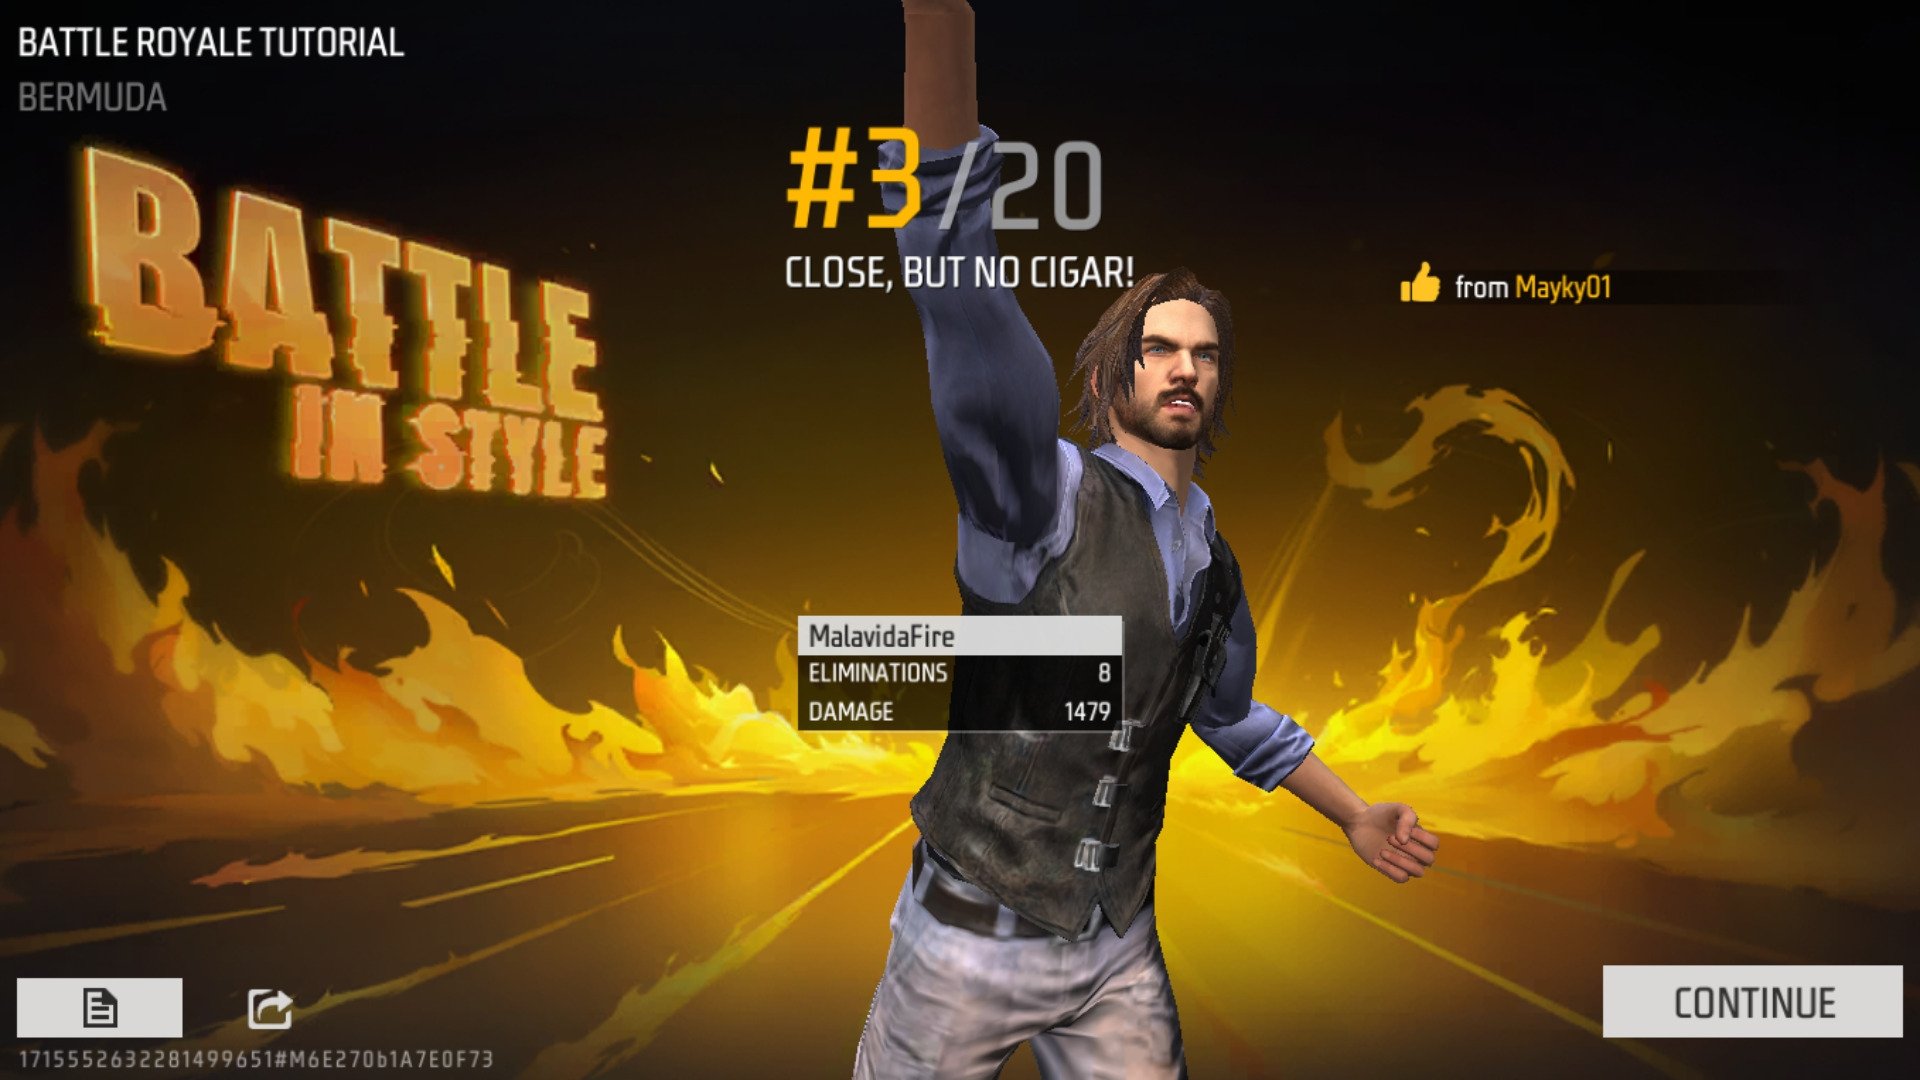 Free Fire MAX Download for PC- Play the Battle Royale Game